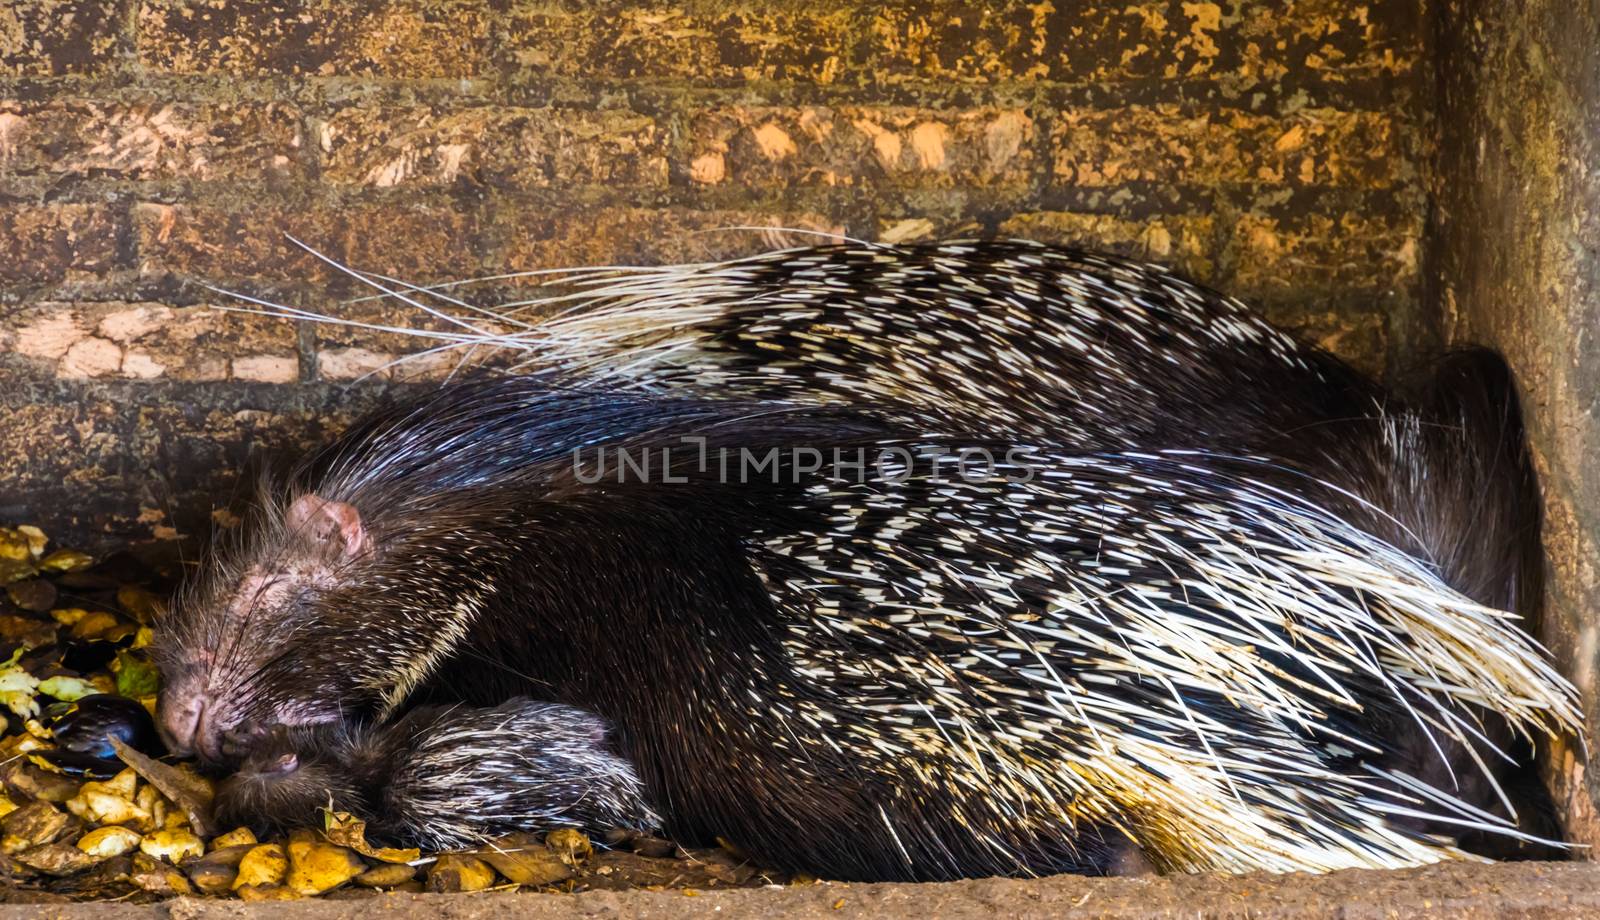 crested porcupine couple sleeping together, tropical rodent specie from Africa